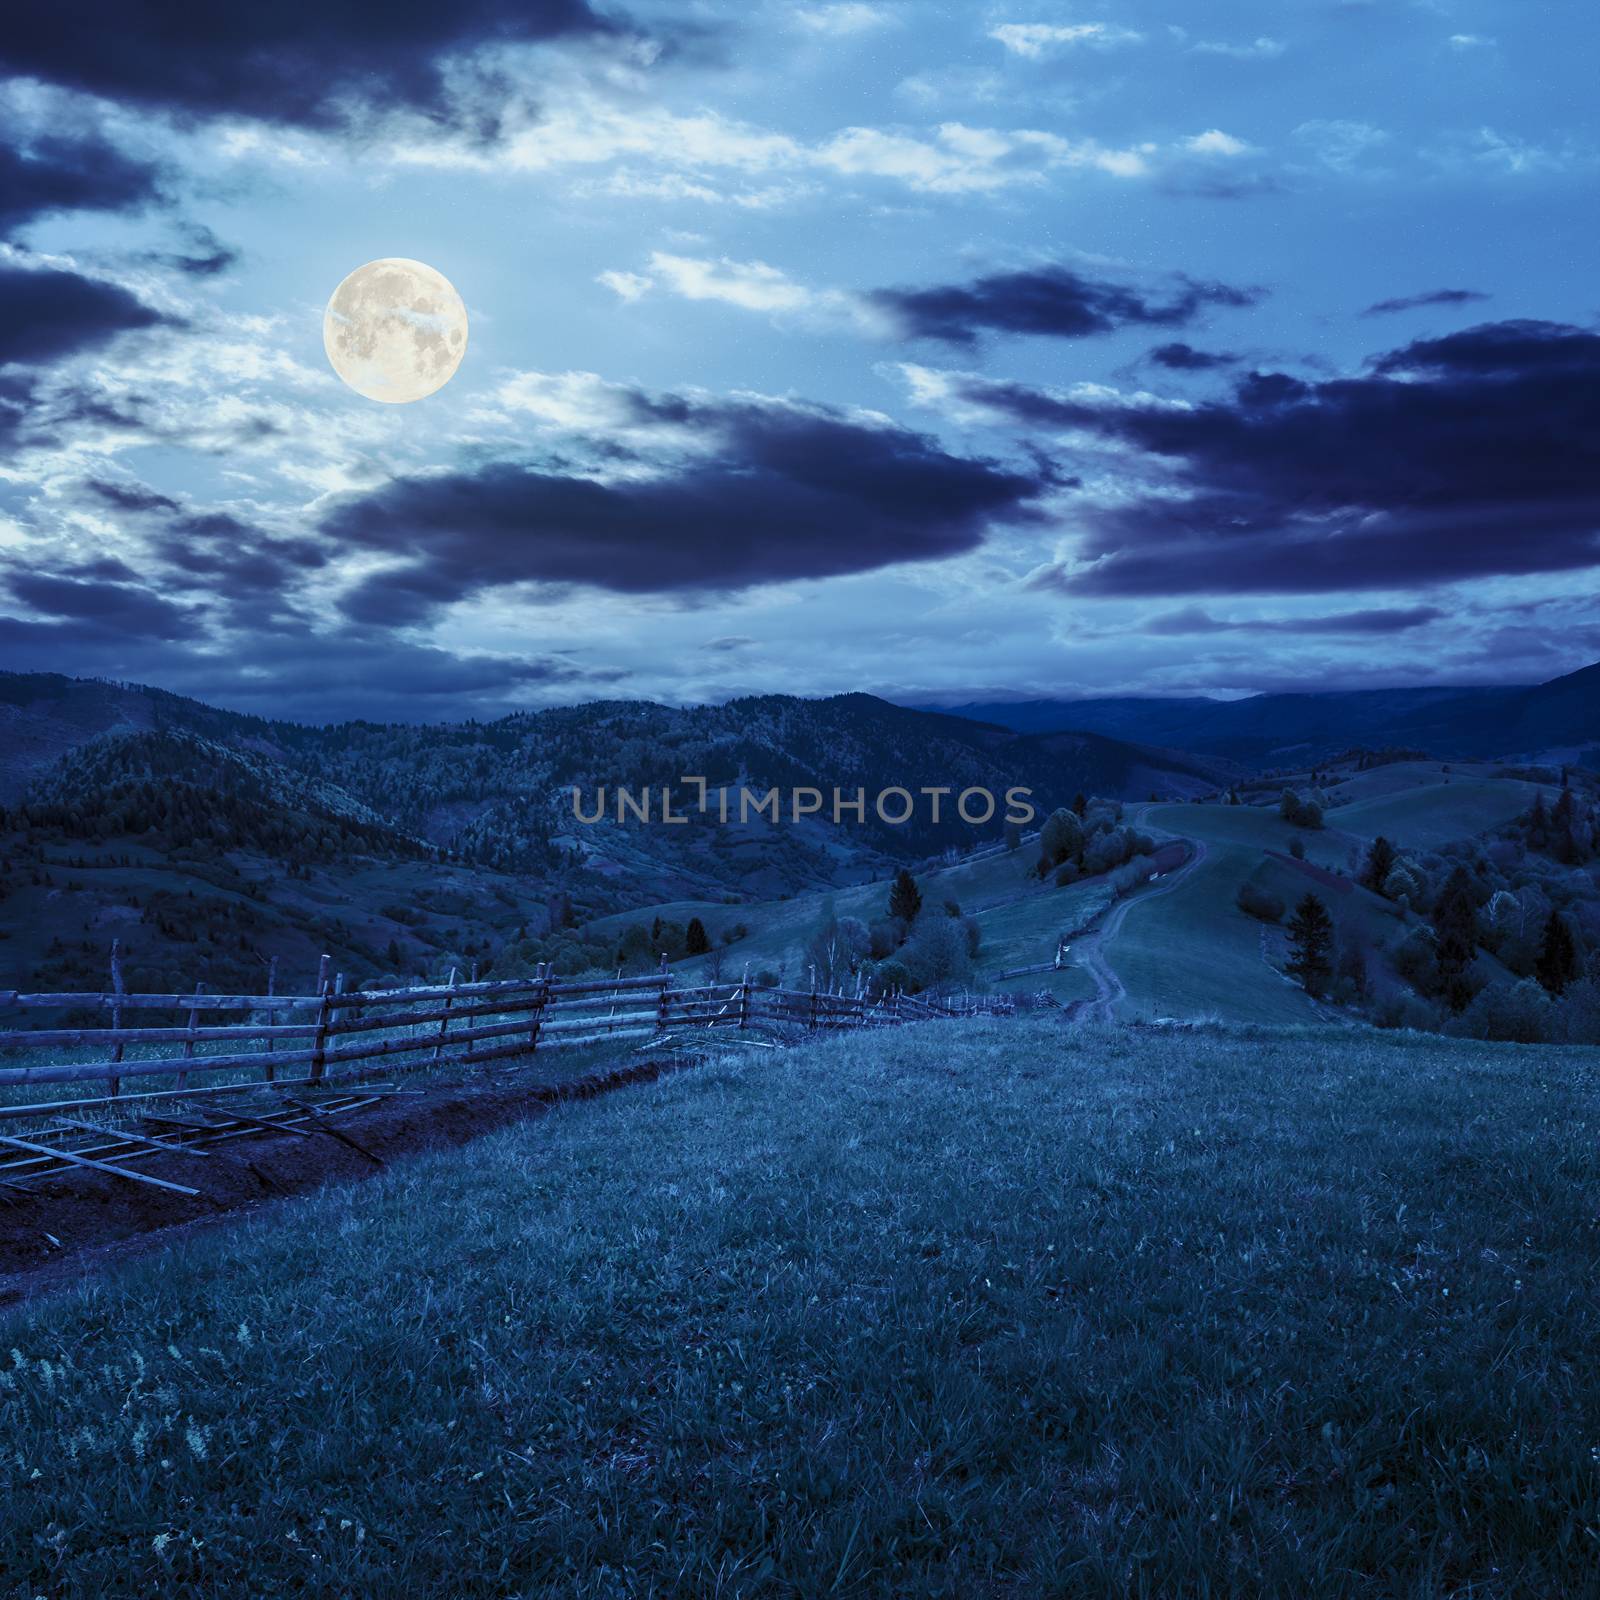 fence on hillside meadow in mountain at night by Pellinni